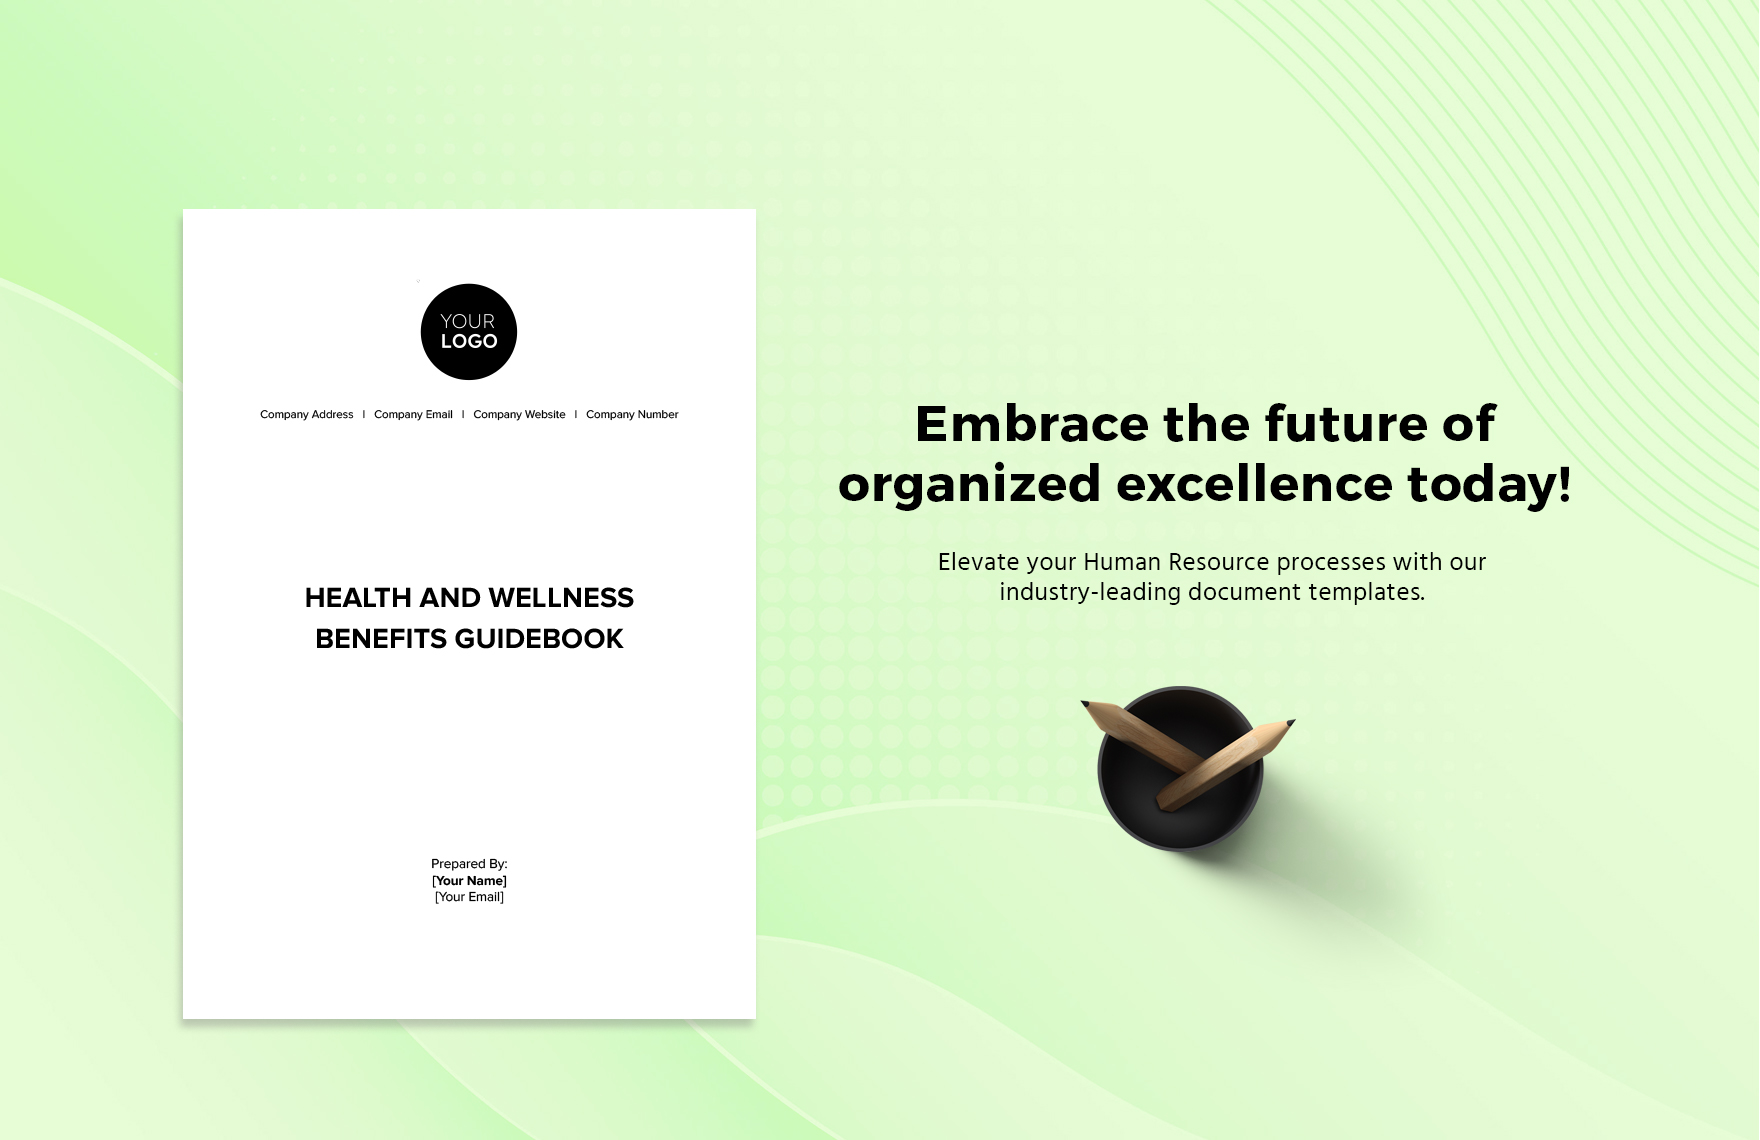 Health and Wellness Benefits Guidebook HR Template